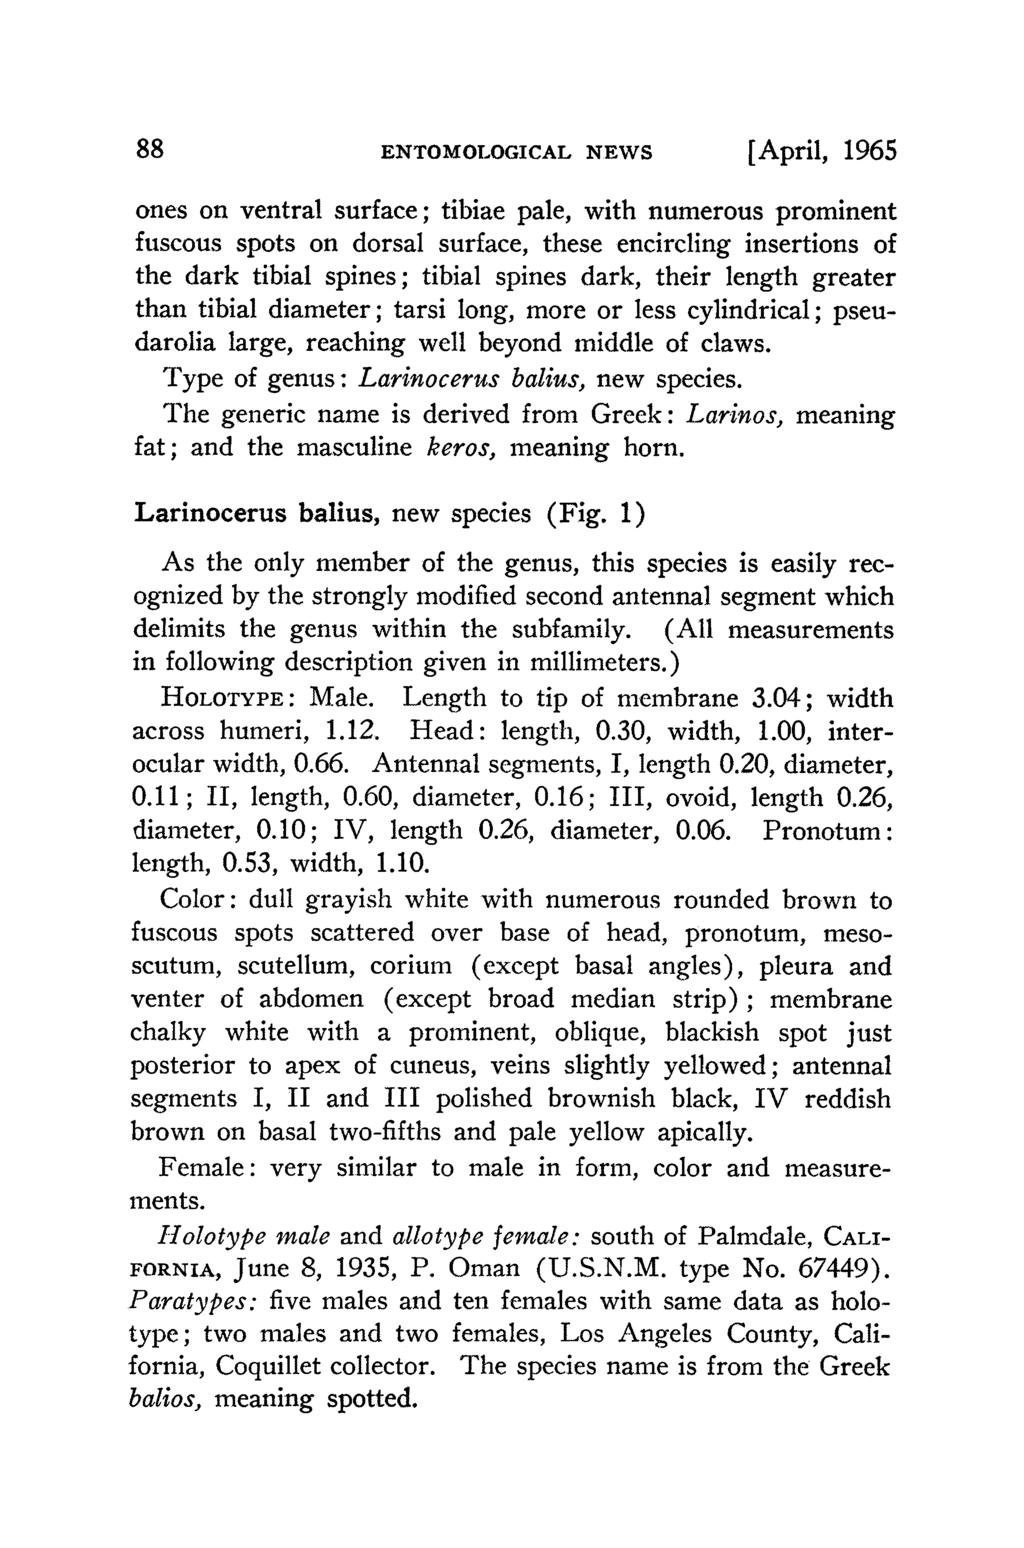 88 ENTOMOLOGICAL NEWS [April, 1965 ones on ventral surface; tibiae pale, with numerous prominent fuscous spots on dorsal surface, these encircling insertions of the dark tibial spines; tibial spines